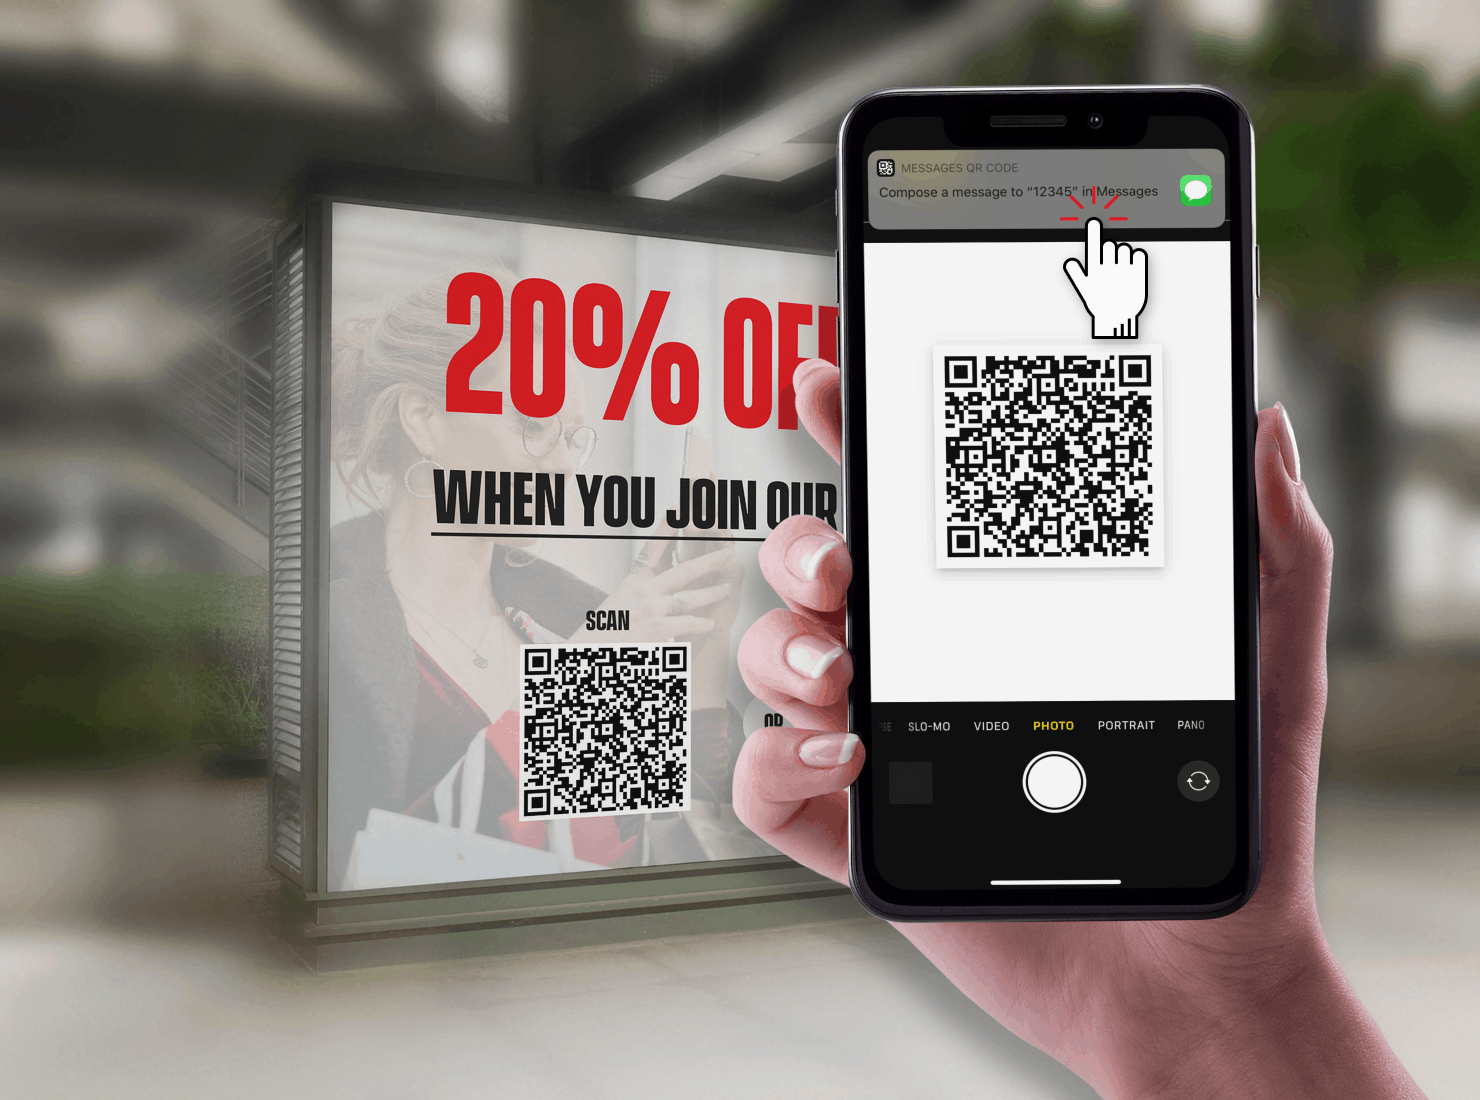 SMS Marketing with QR Codes - Step 3 Create Text Message